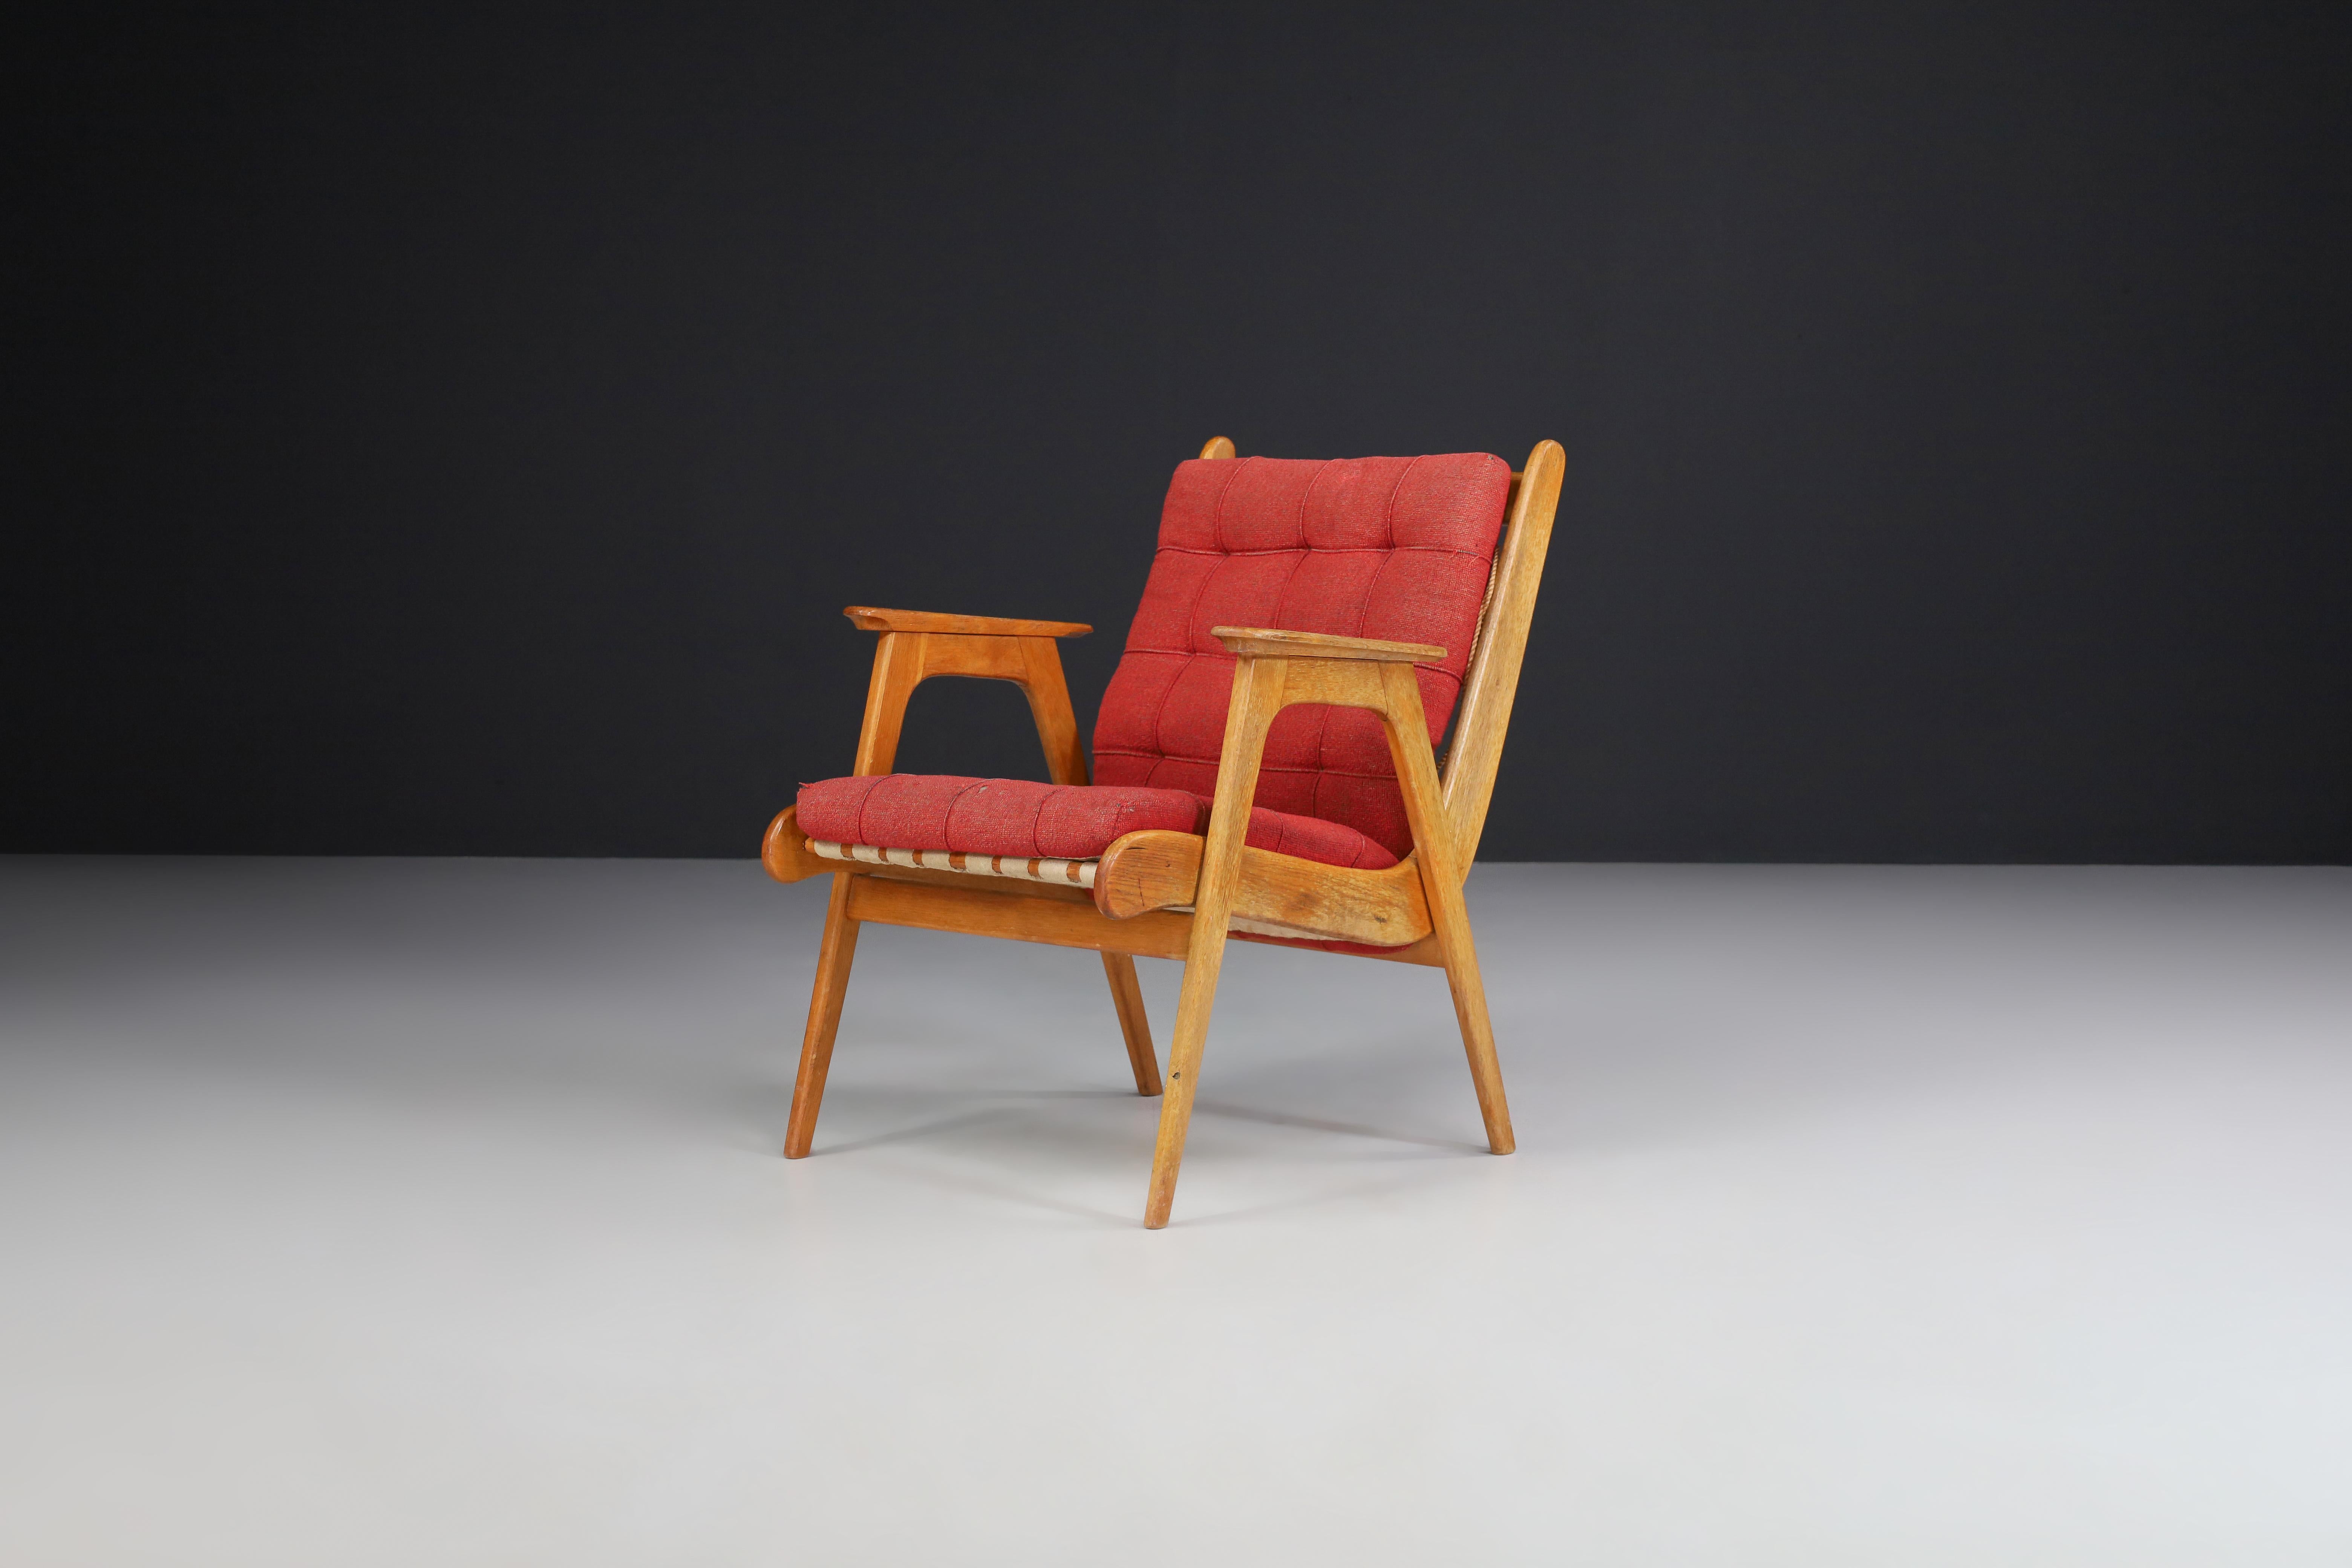 Oak armchair with red upholstery, France 1950s

Midcentury oak armchair manufactured and designed in France 1950s. This armchair has the original upholstery fabric and a lovely elegant french oak frame. It is in perfect condition, minor patina on